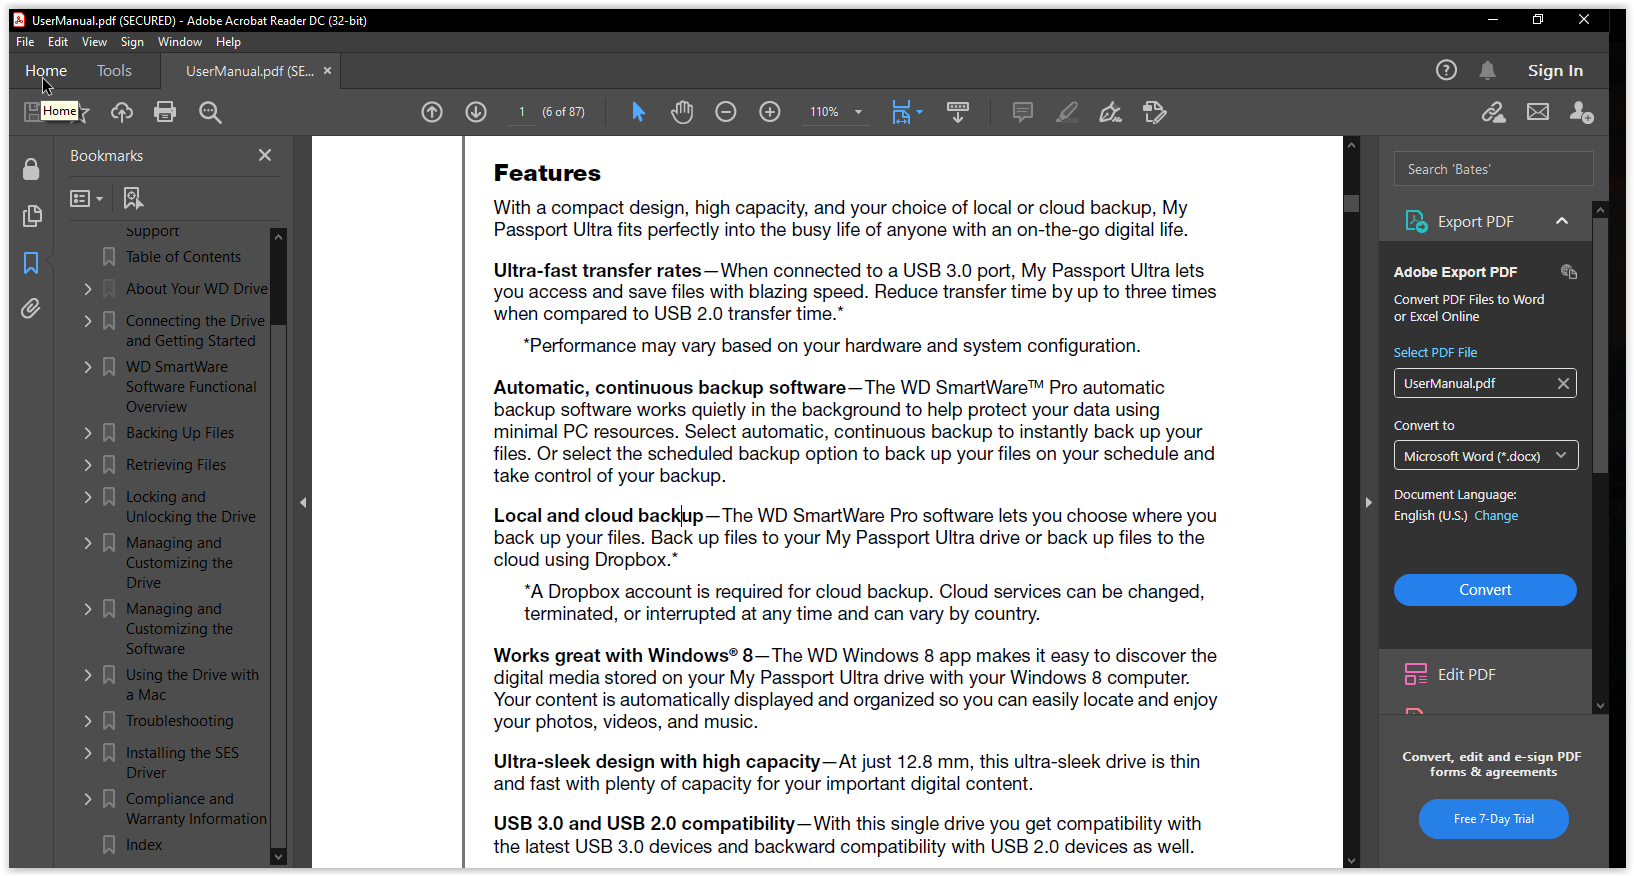 How to Change Your Text Color in a PDF